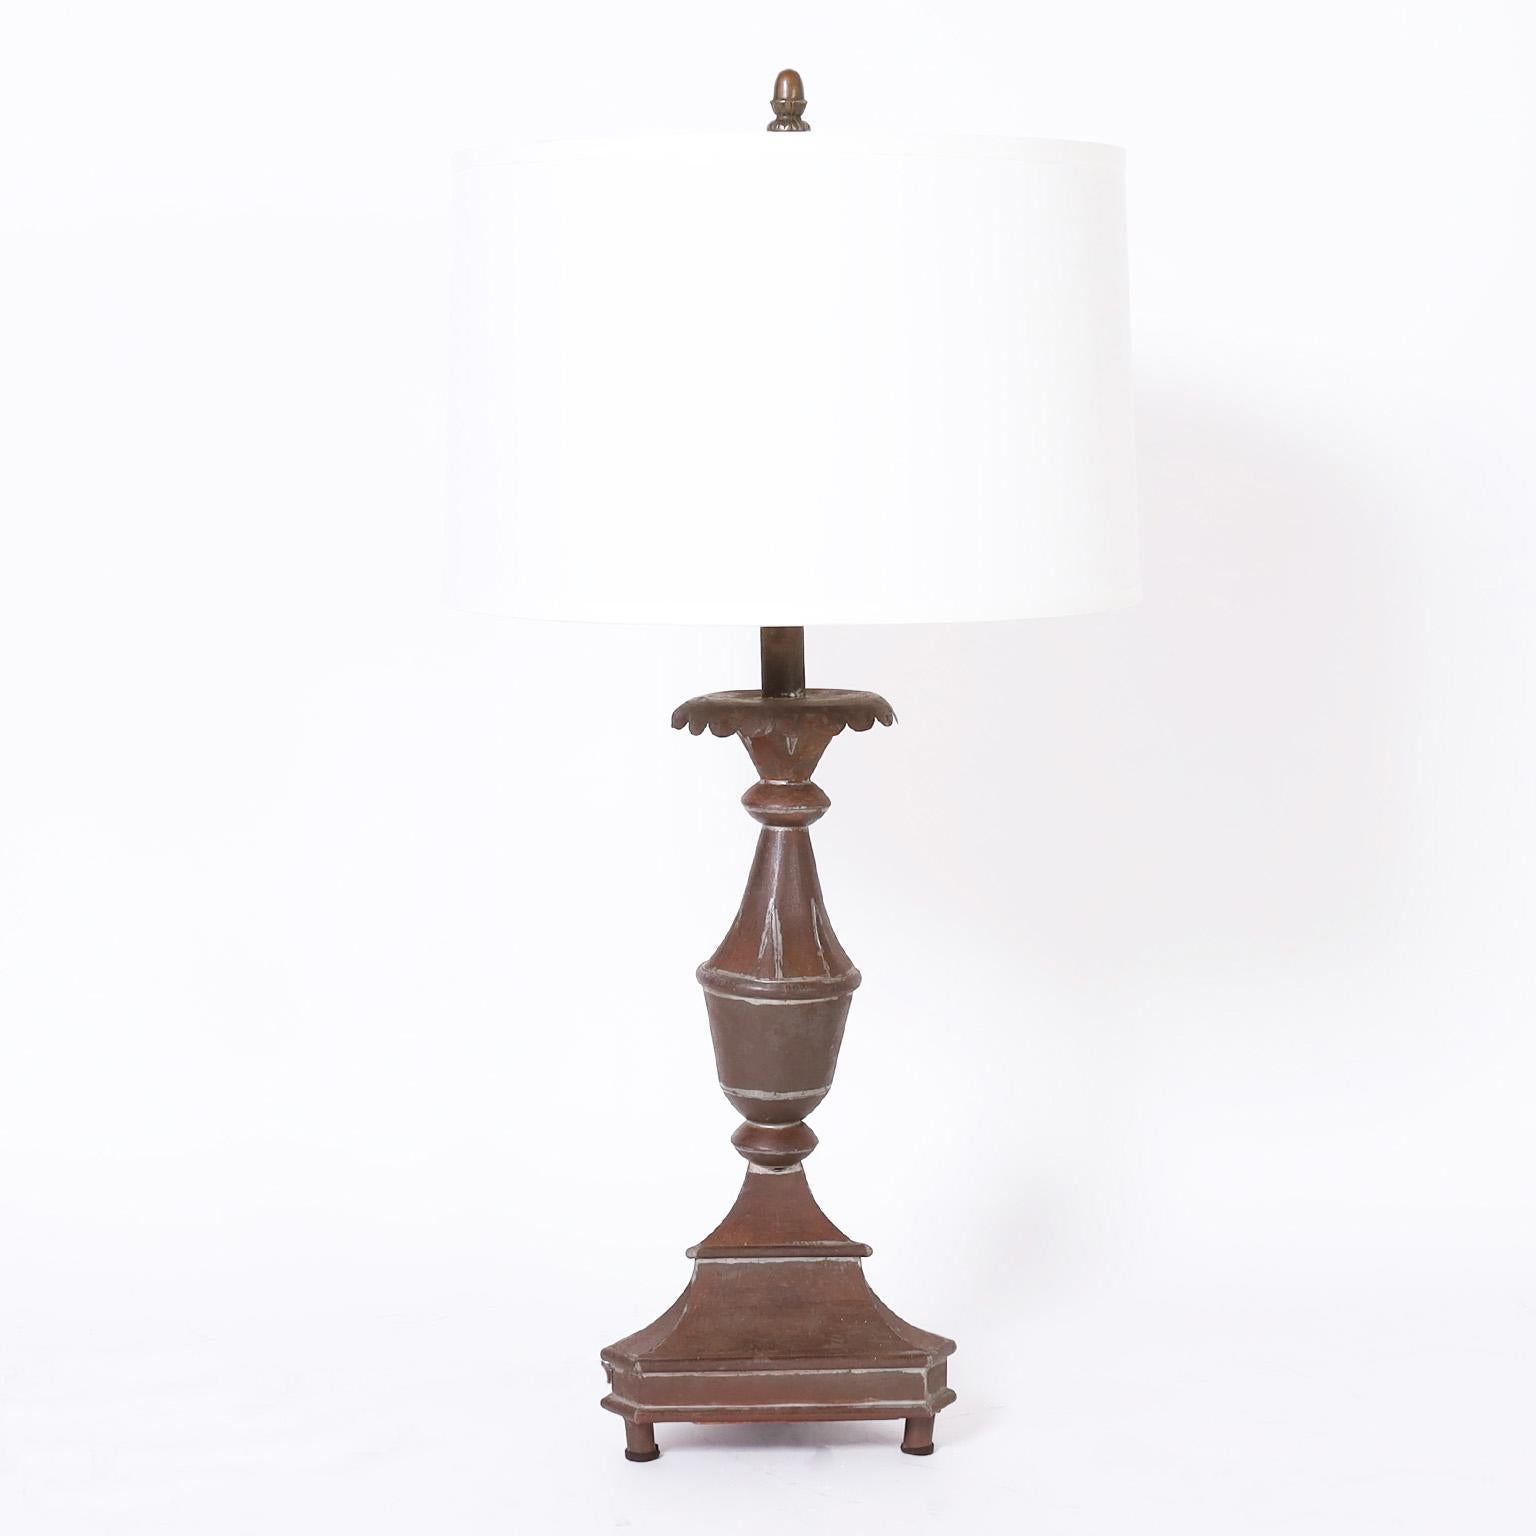 Pair of 19th century large scale candlesticks converted to table lamps, hand crafted with tin in a rustic neoclassic form with an acquired time worn oxidized finish.